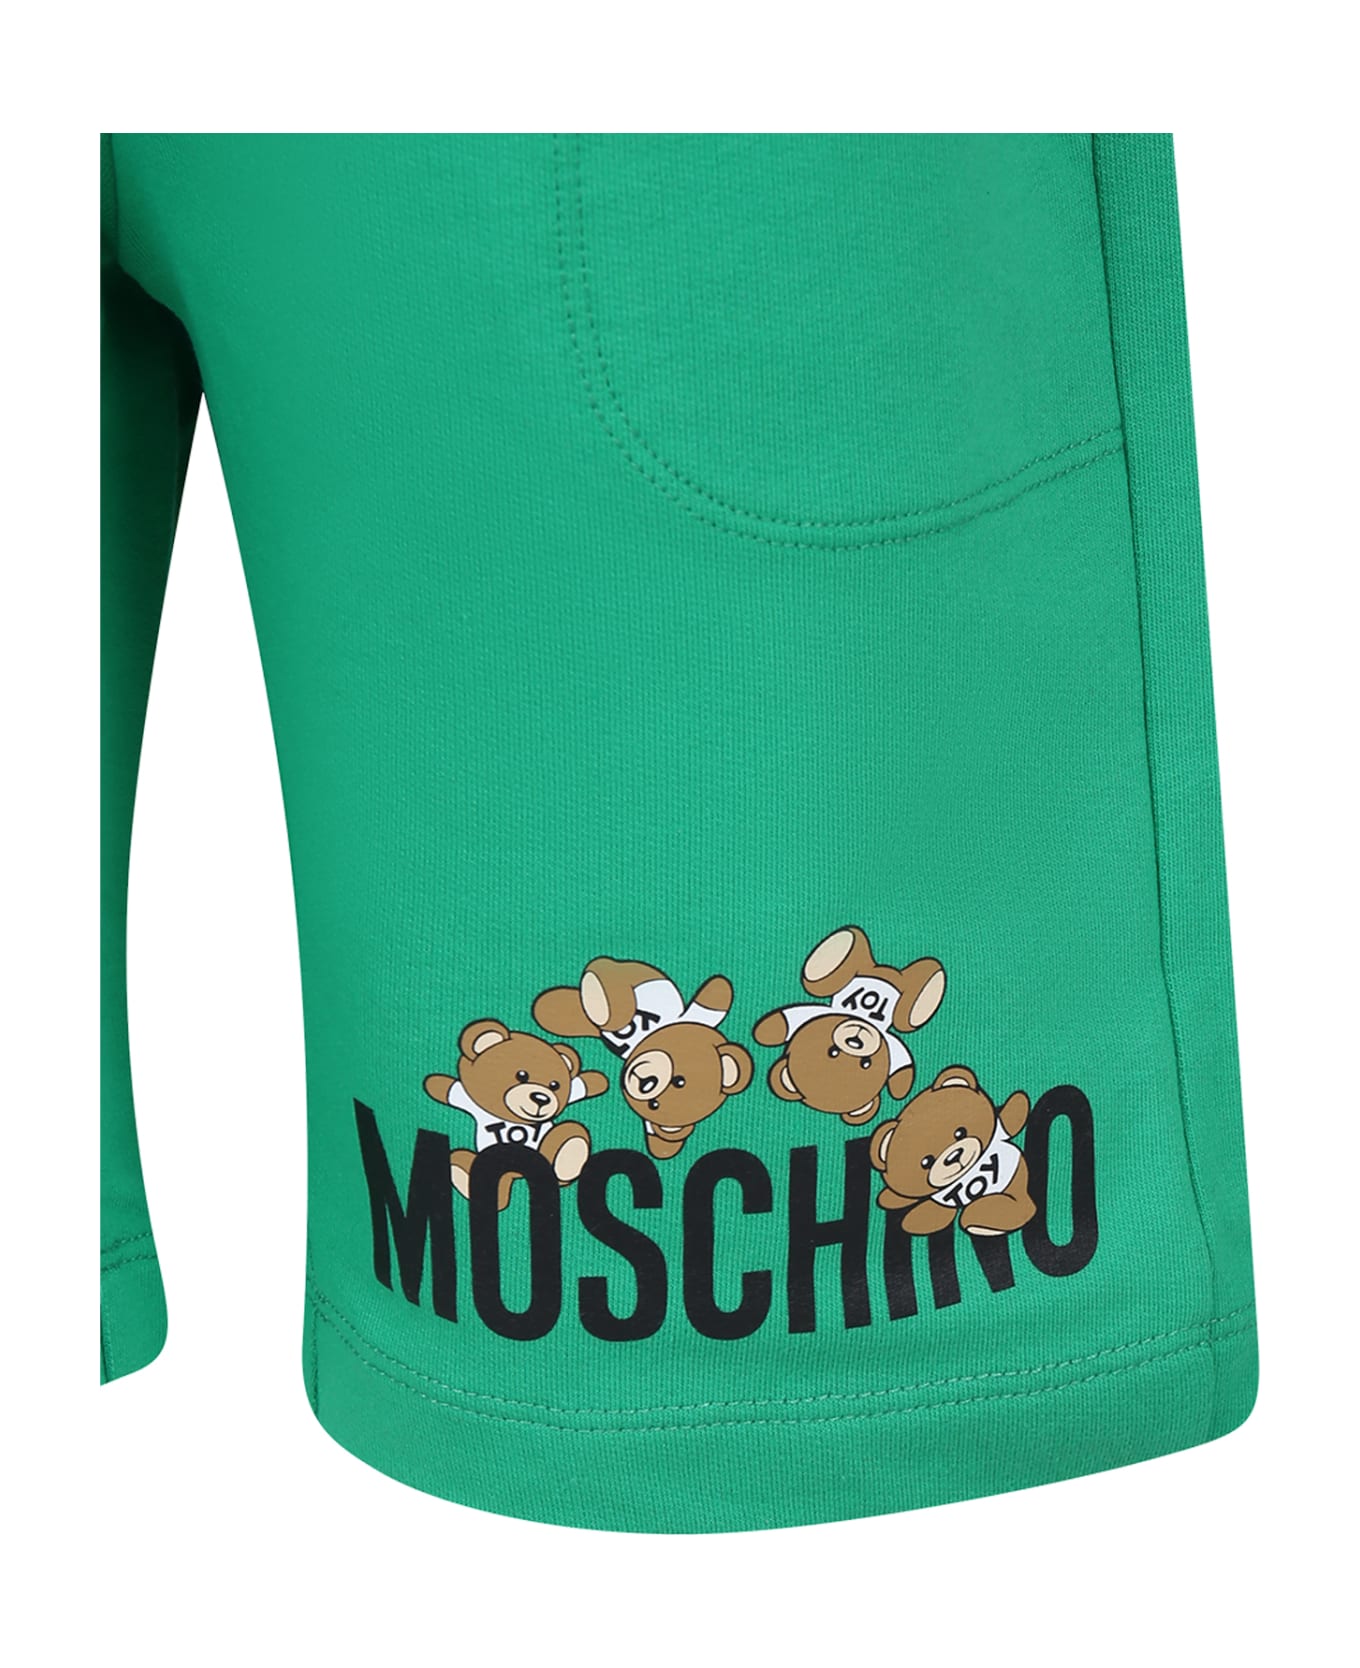 Moschino Green Shorts For Kids With Teddy Bears And Logo - Green